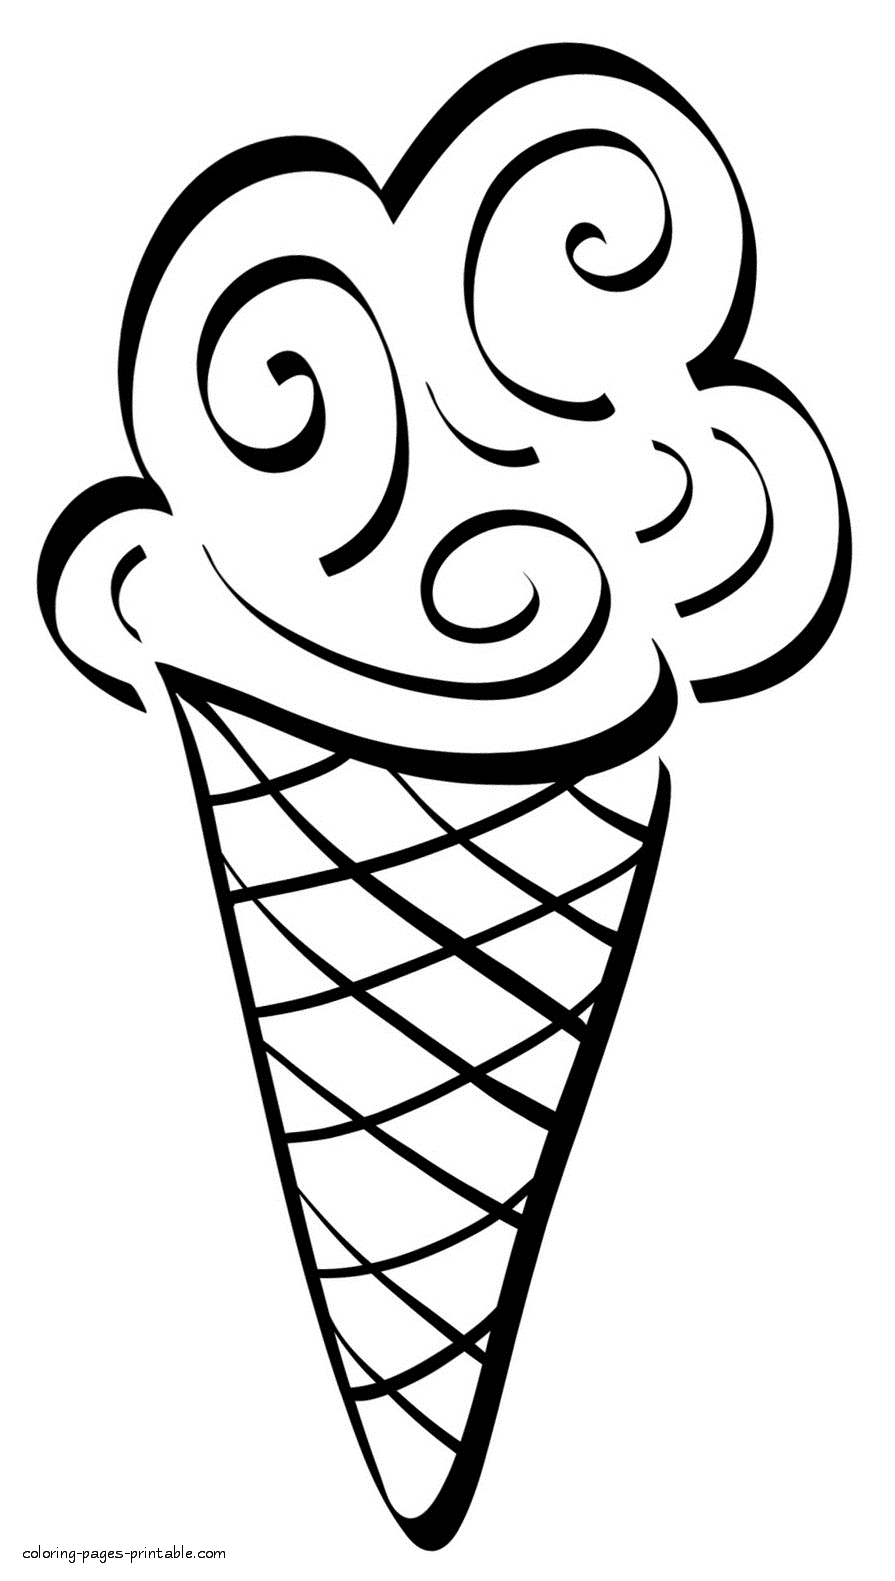 Download Ice cream coloring printables || COLORING-PAGES-PRINTABLE.COM